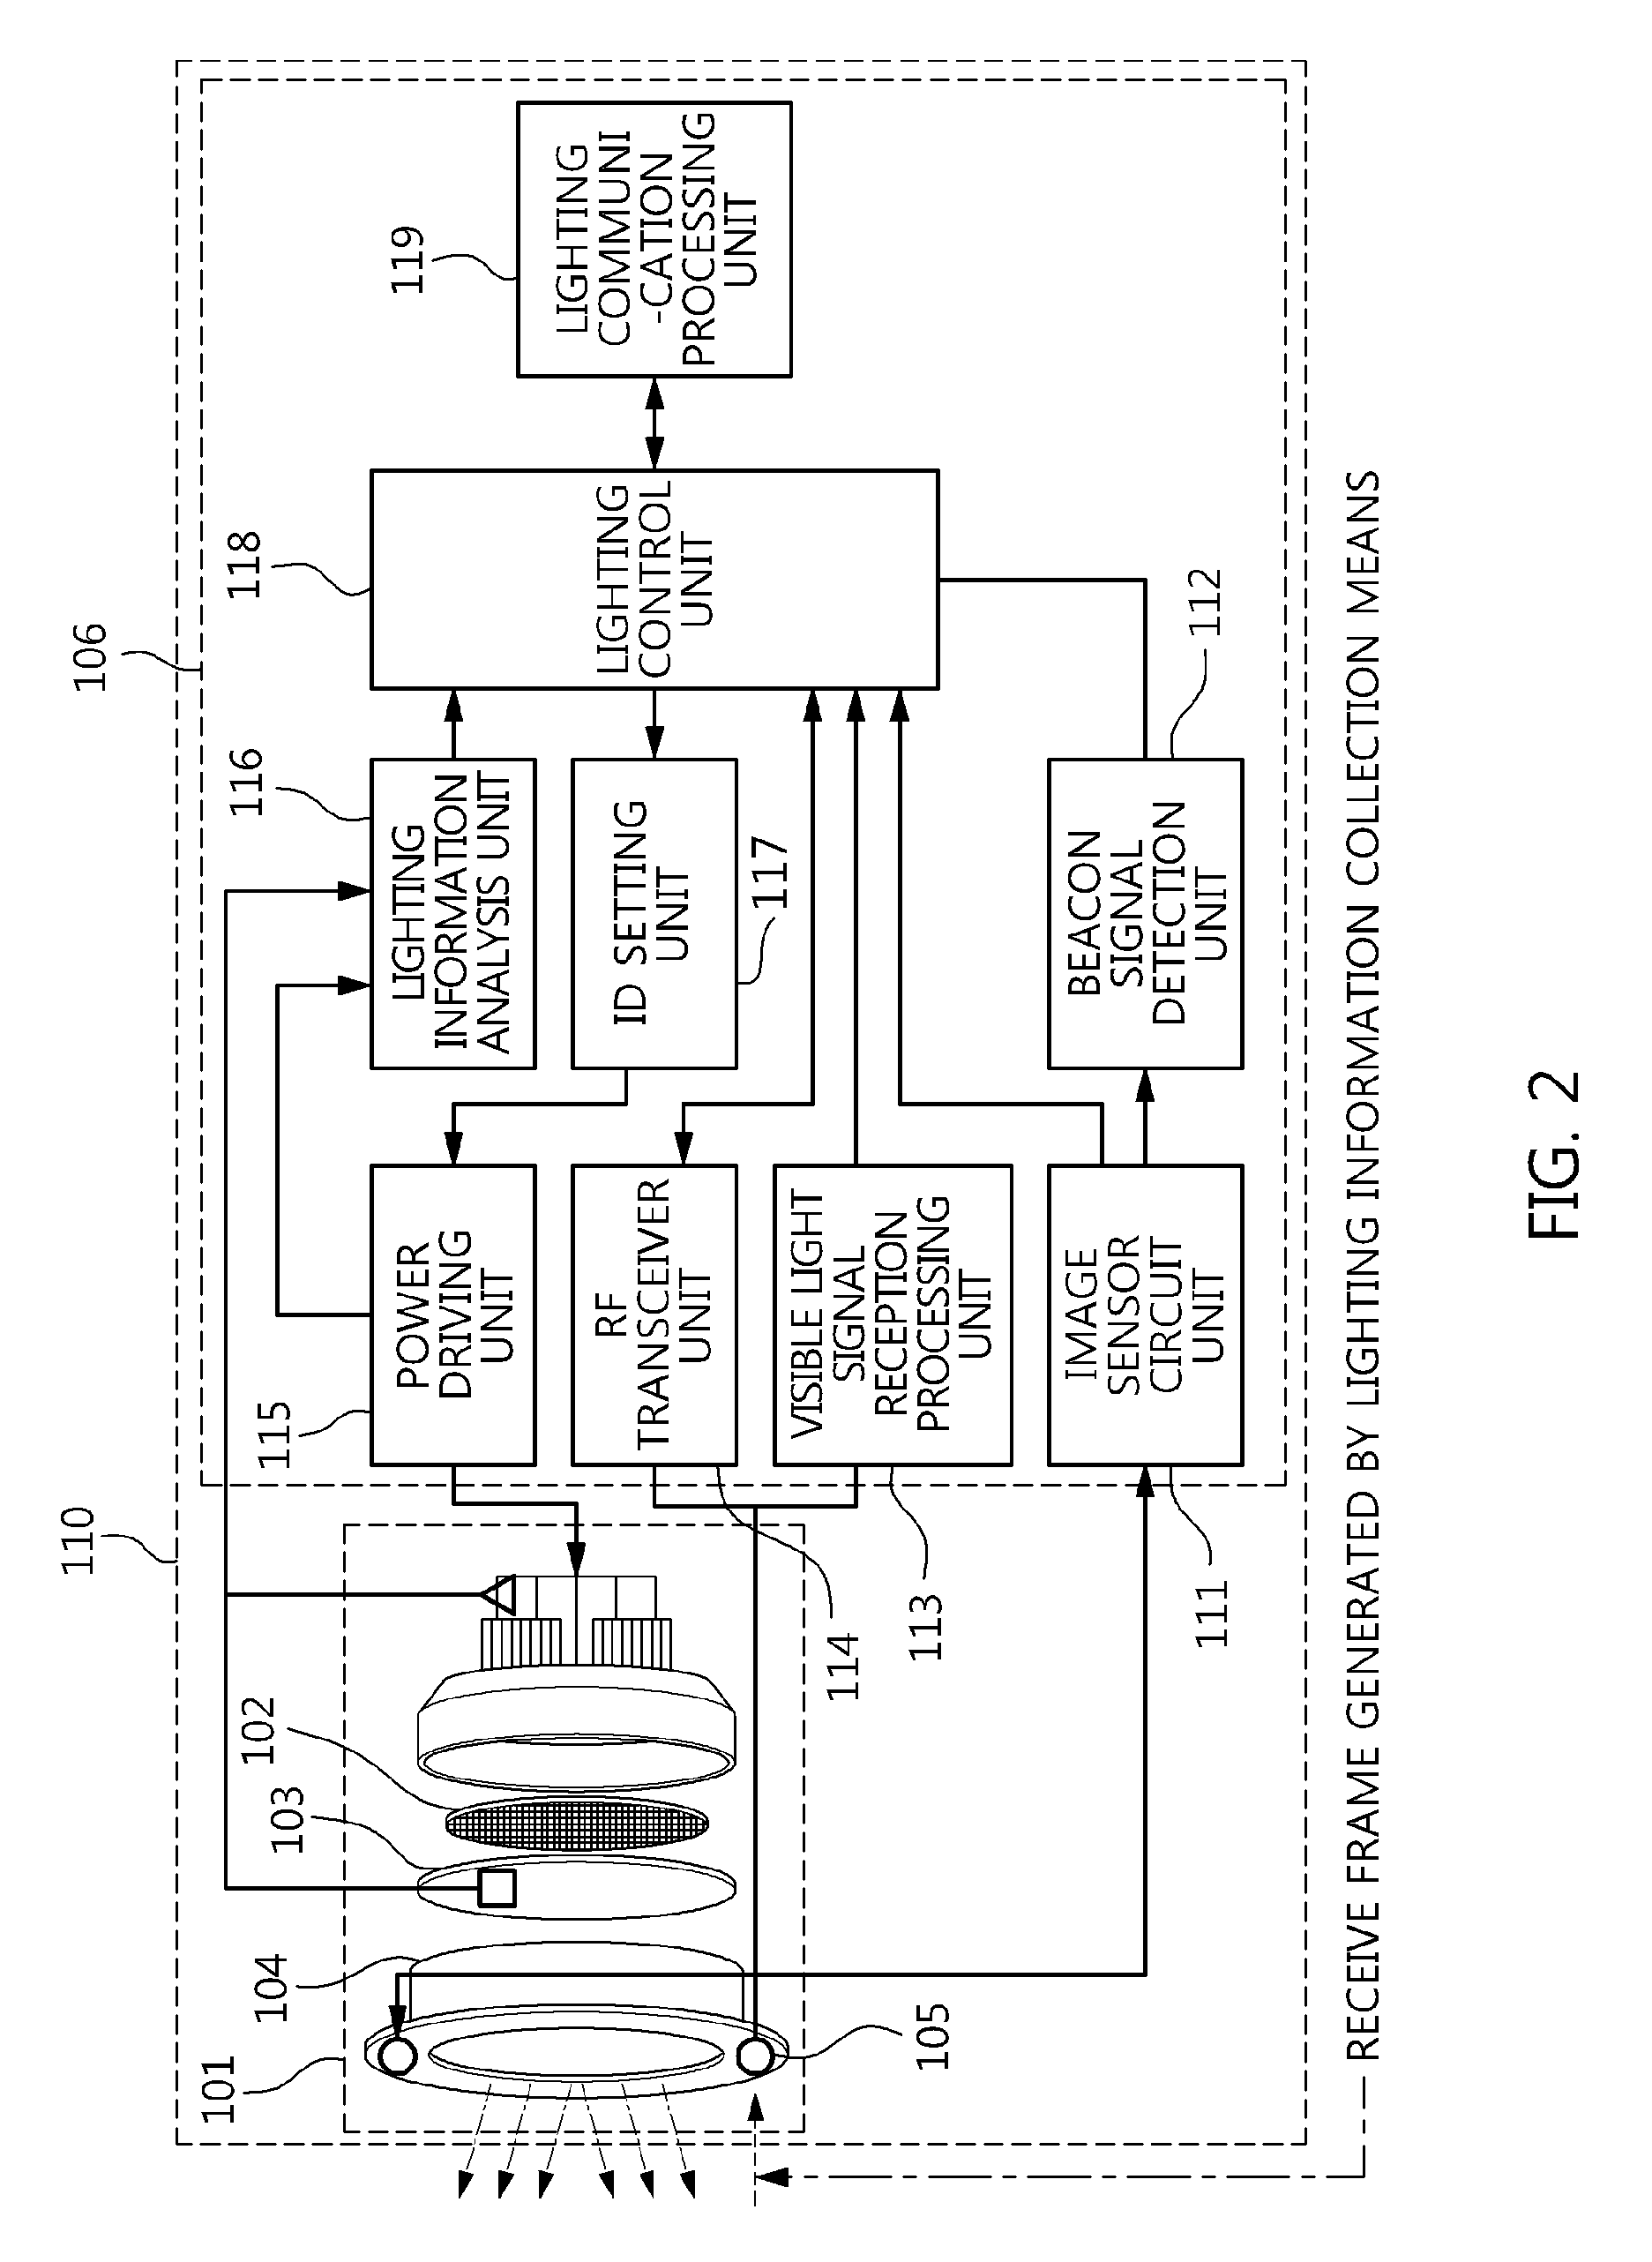 LED lighting control apparatus and method based on visible light communication